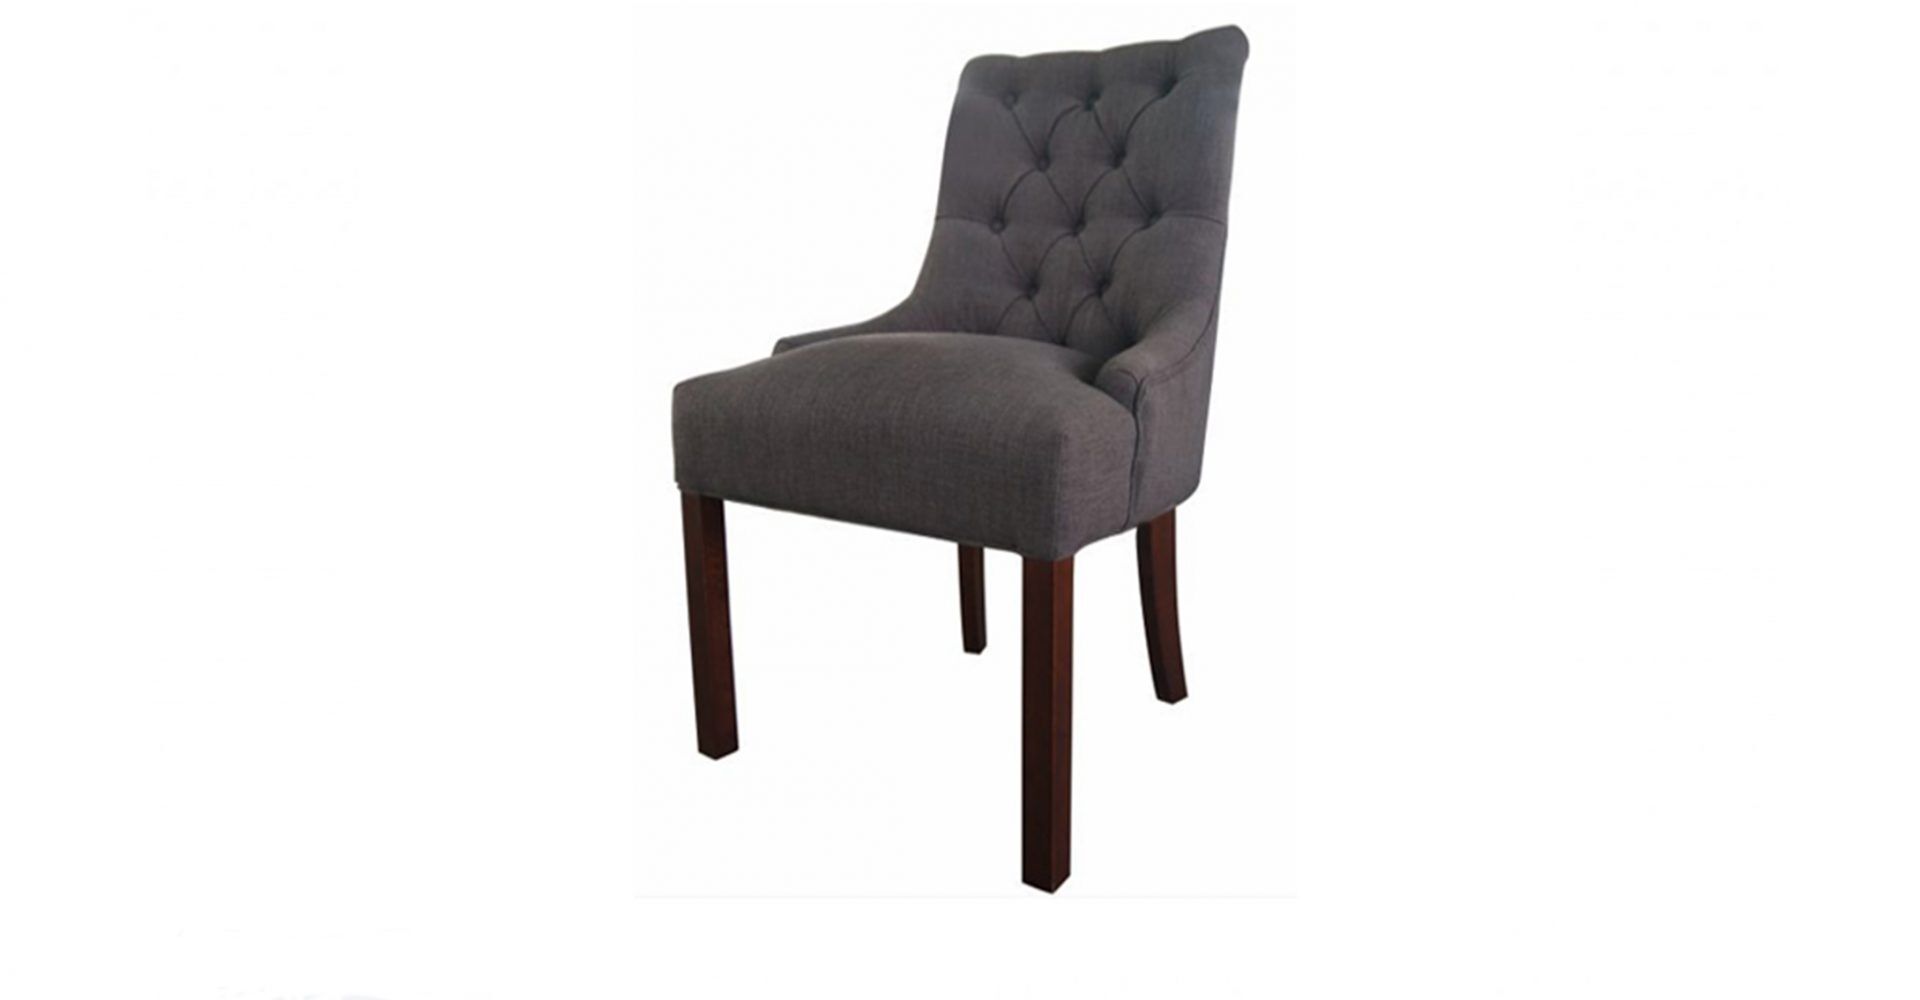 Tufted Dining Room Chair With Nailheads